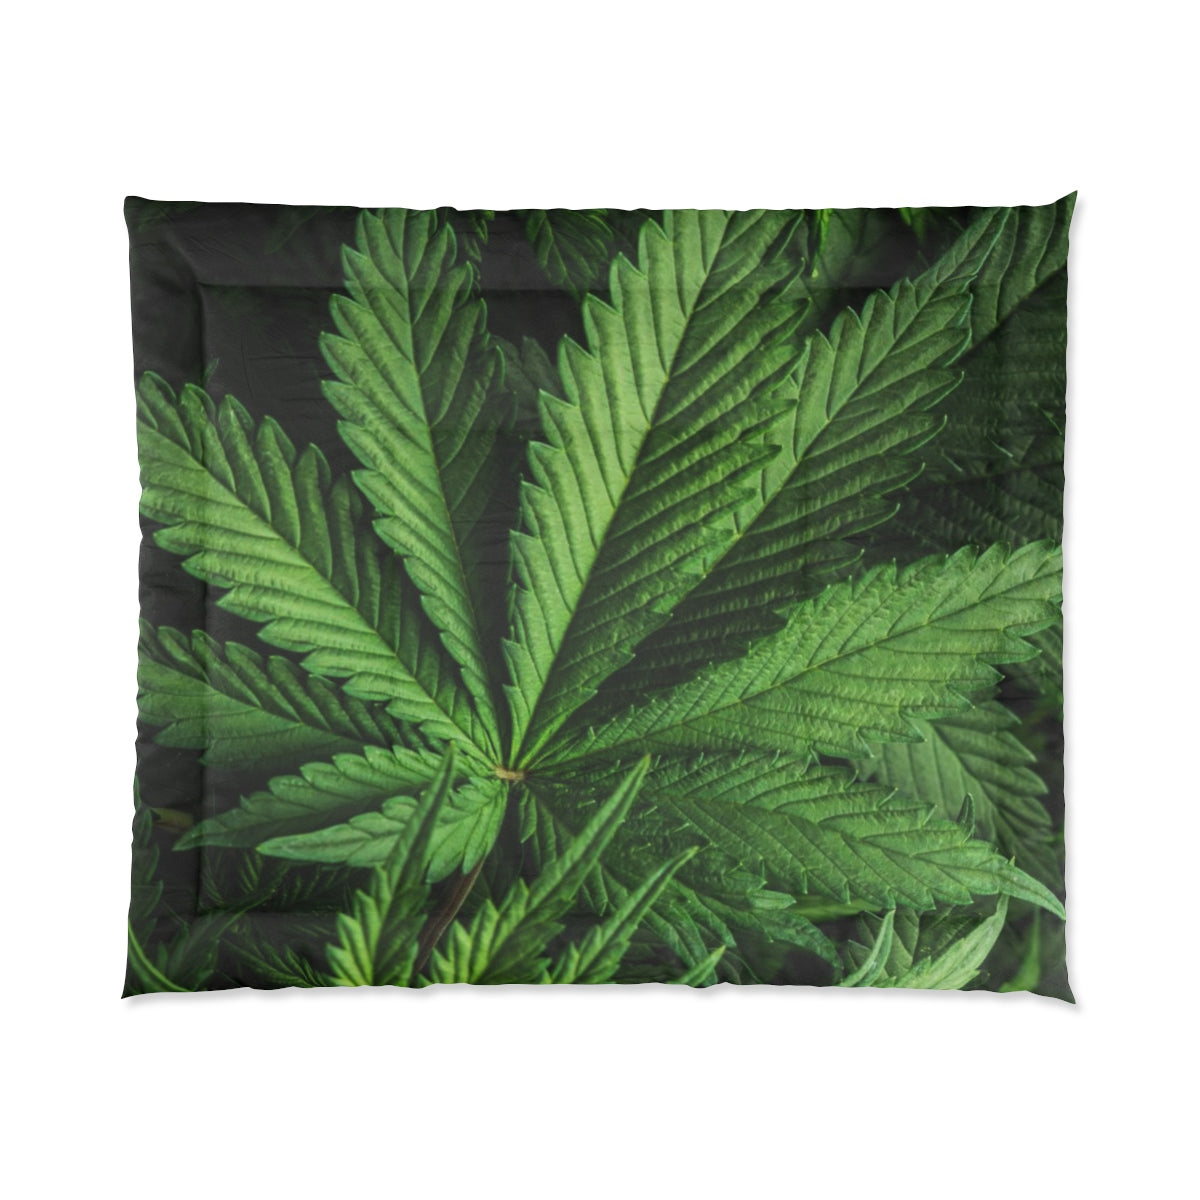 Cannabis Custom Designed Comforter.  A Unique Cannabis Gift For Friends & Family. Cannabis Decor For Your Home. Cannabis Comforter